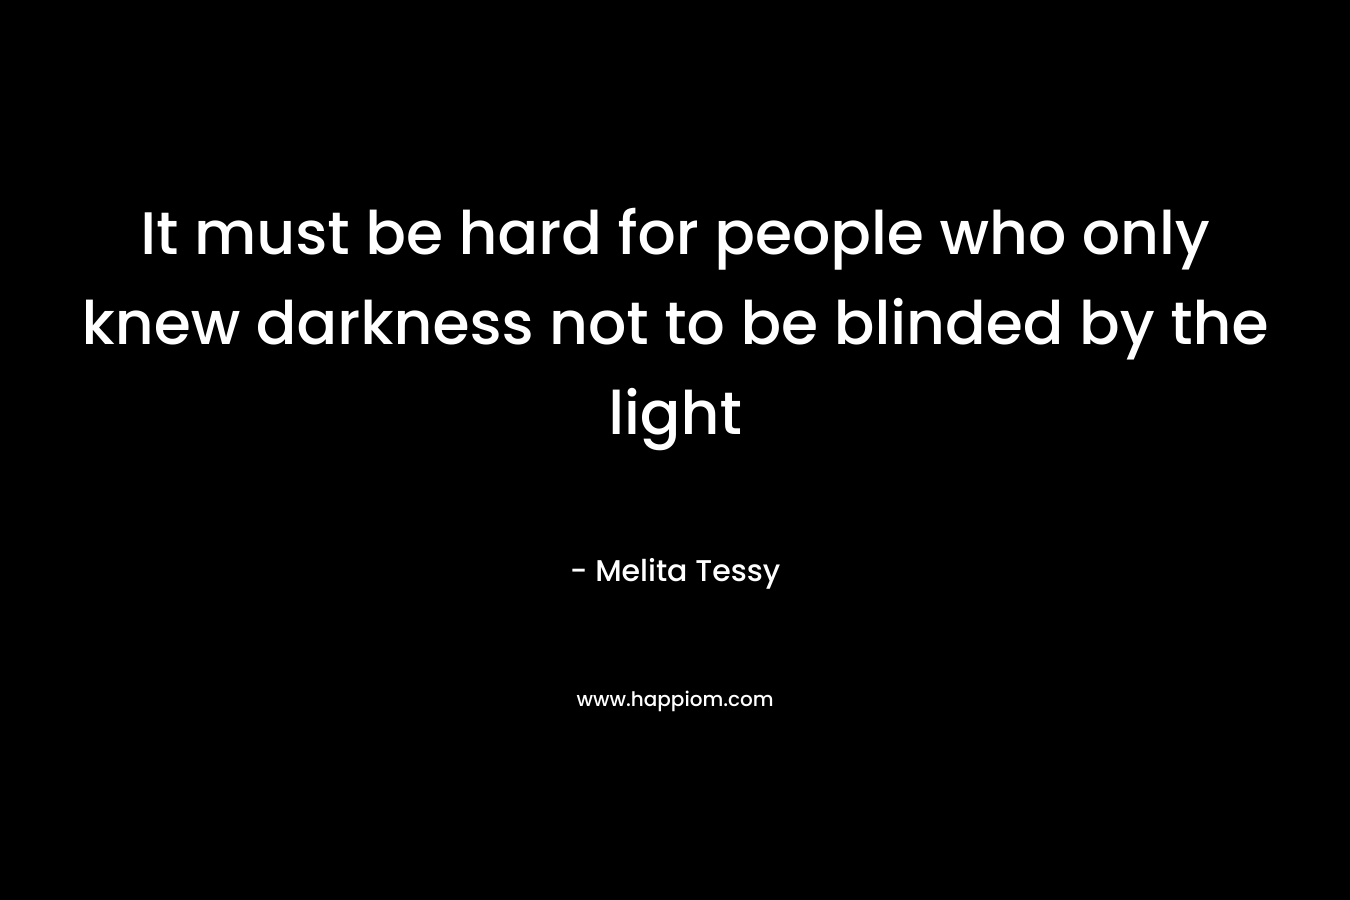 It must be hard for people who only knew darkness not to be blinded by the light – Melita Tessy